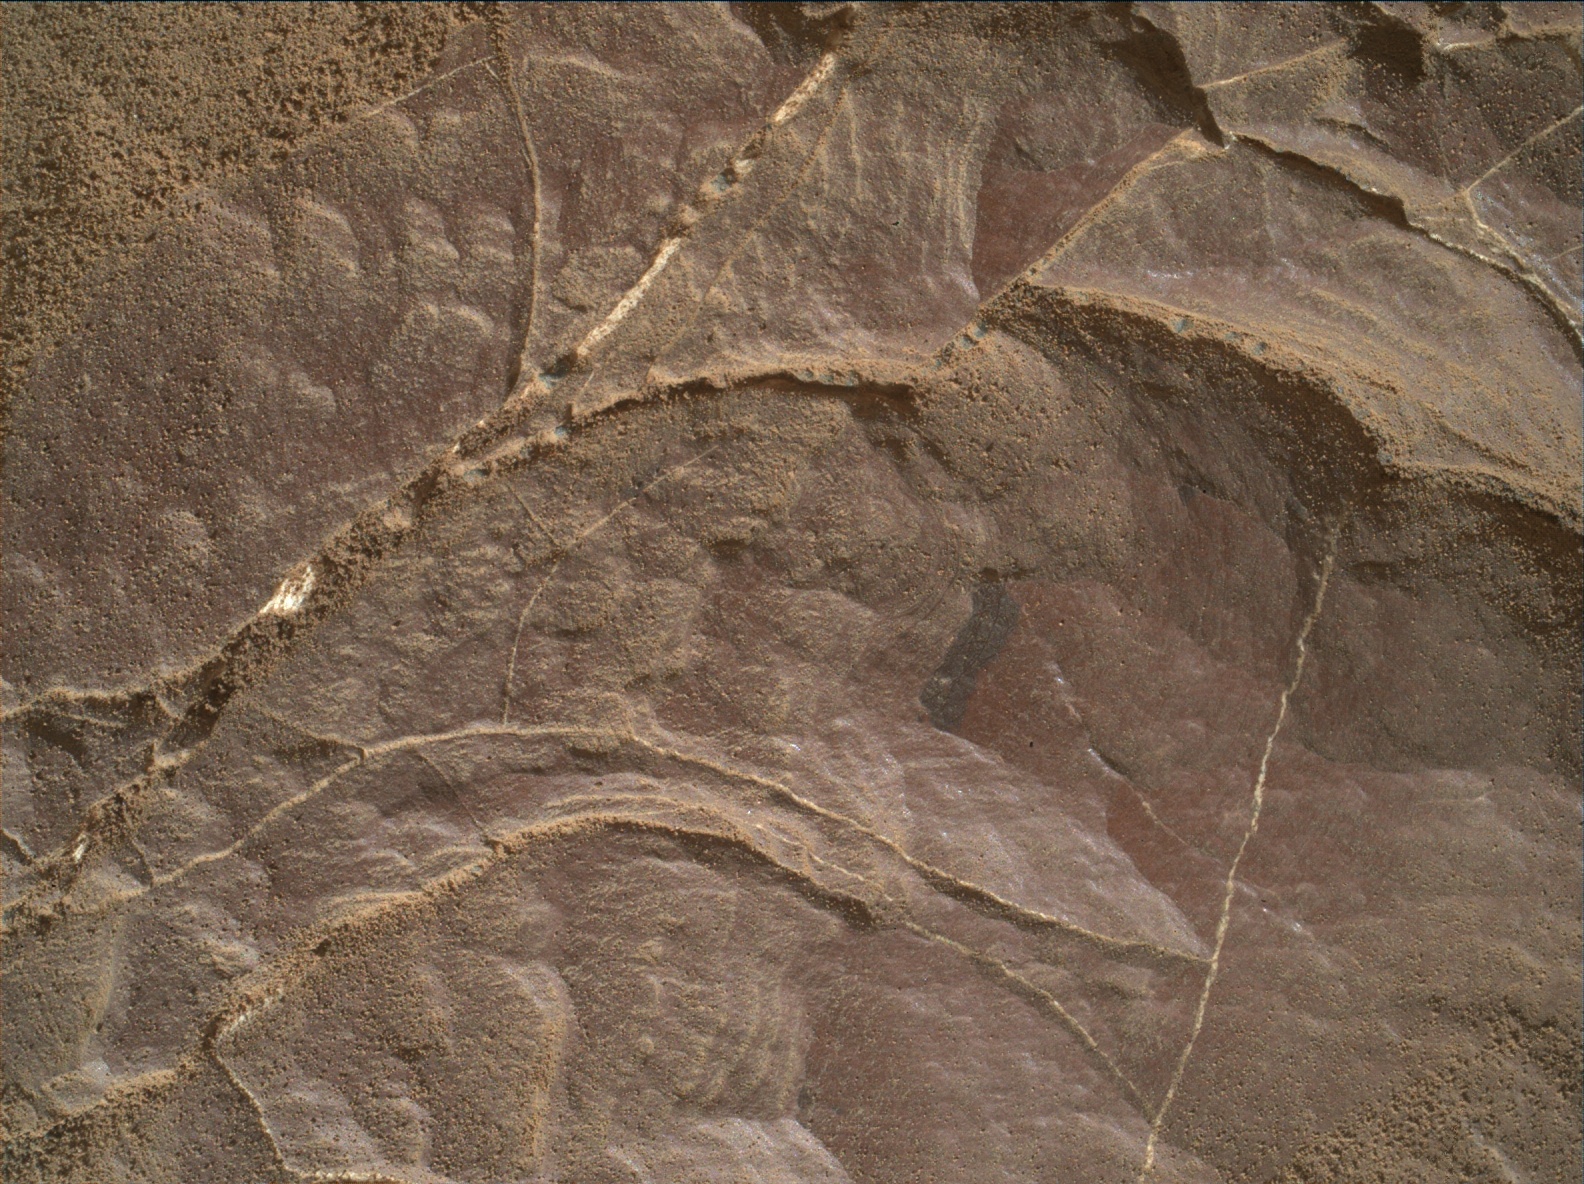 Nasa's Mars rover Curiosity acquired this image using its Mars Hand Lens Imager (MAHLI) on Sol 2009